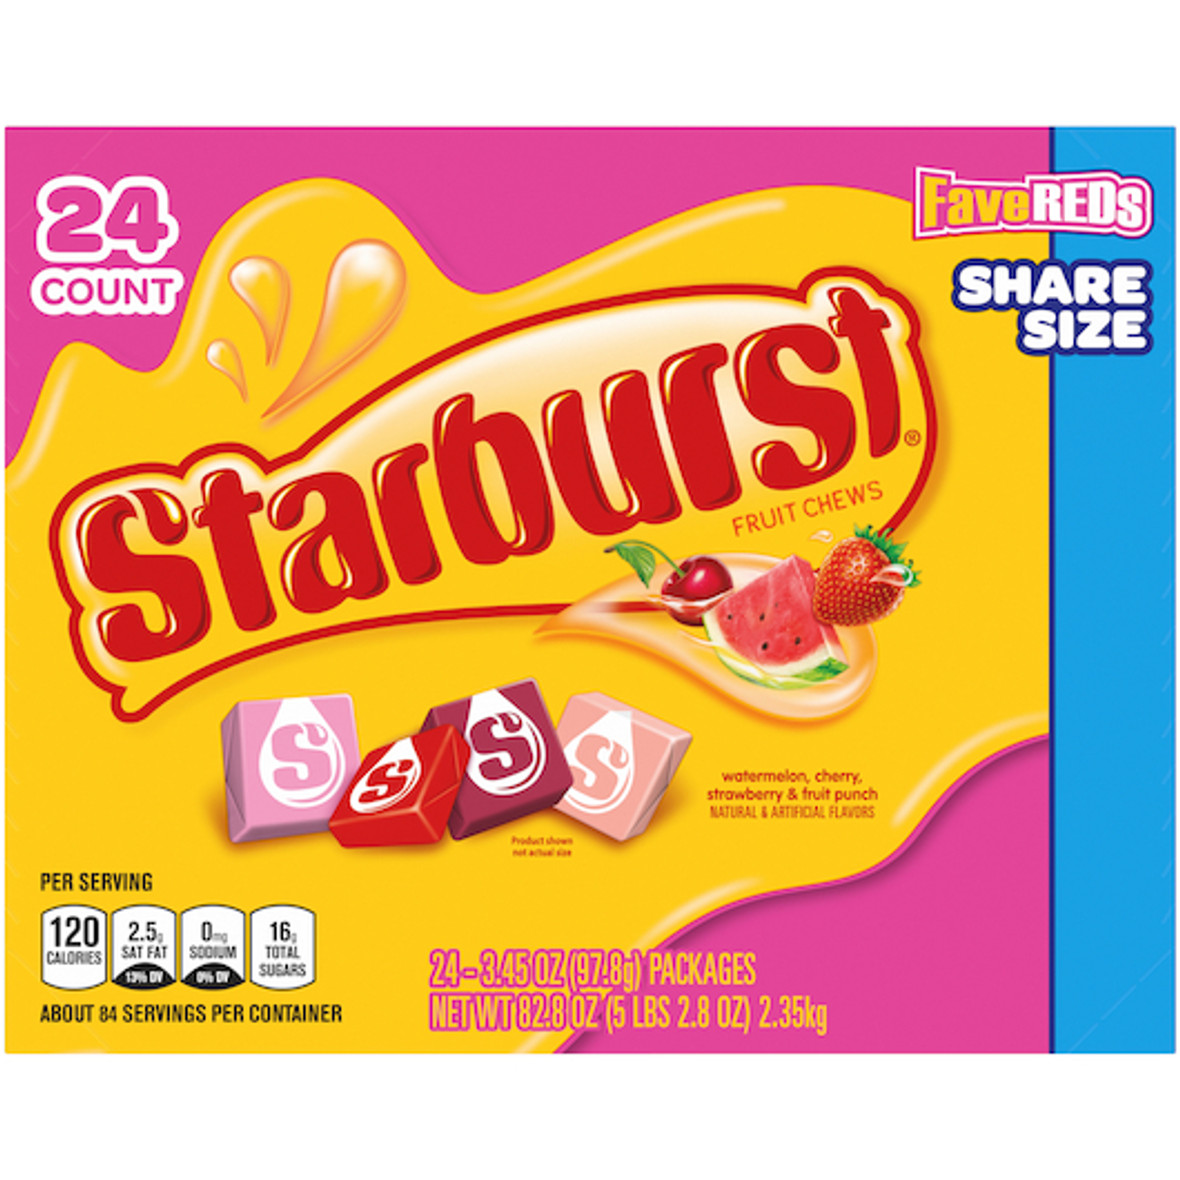 Starburst Fave Reds Tear & Share, 3.45 Ounce, 144 Per Case